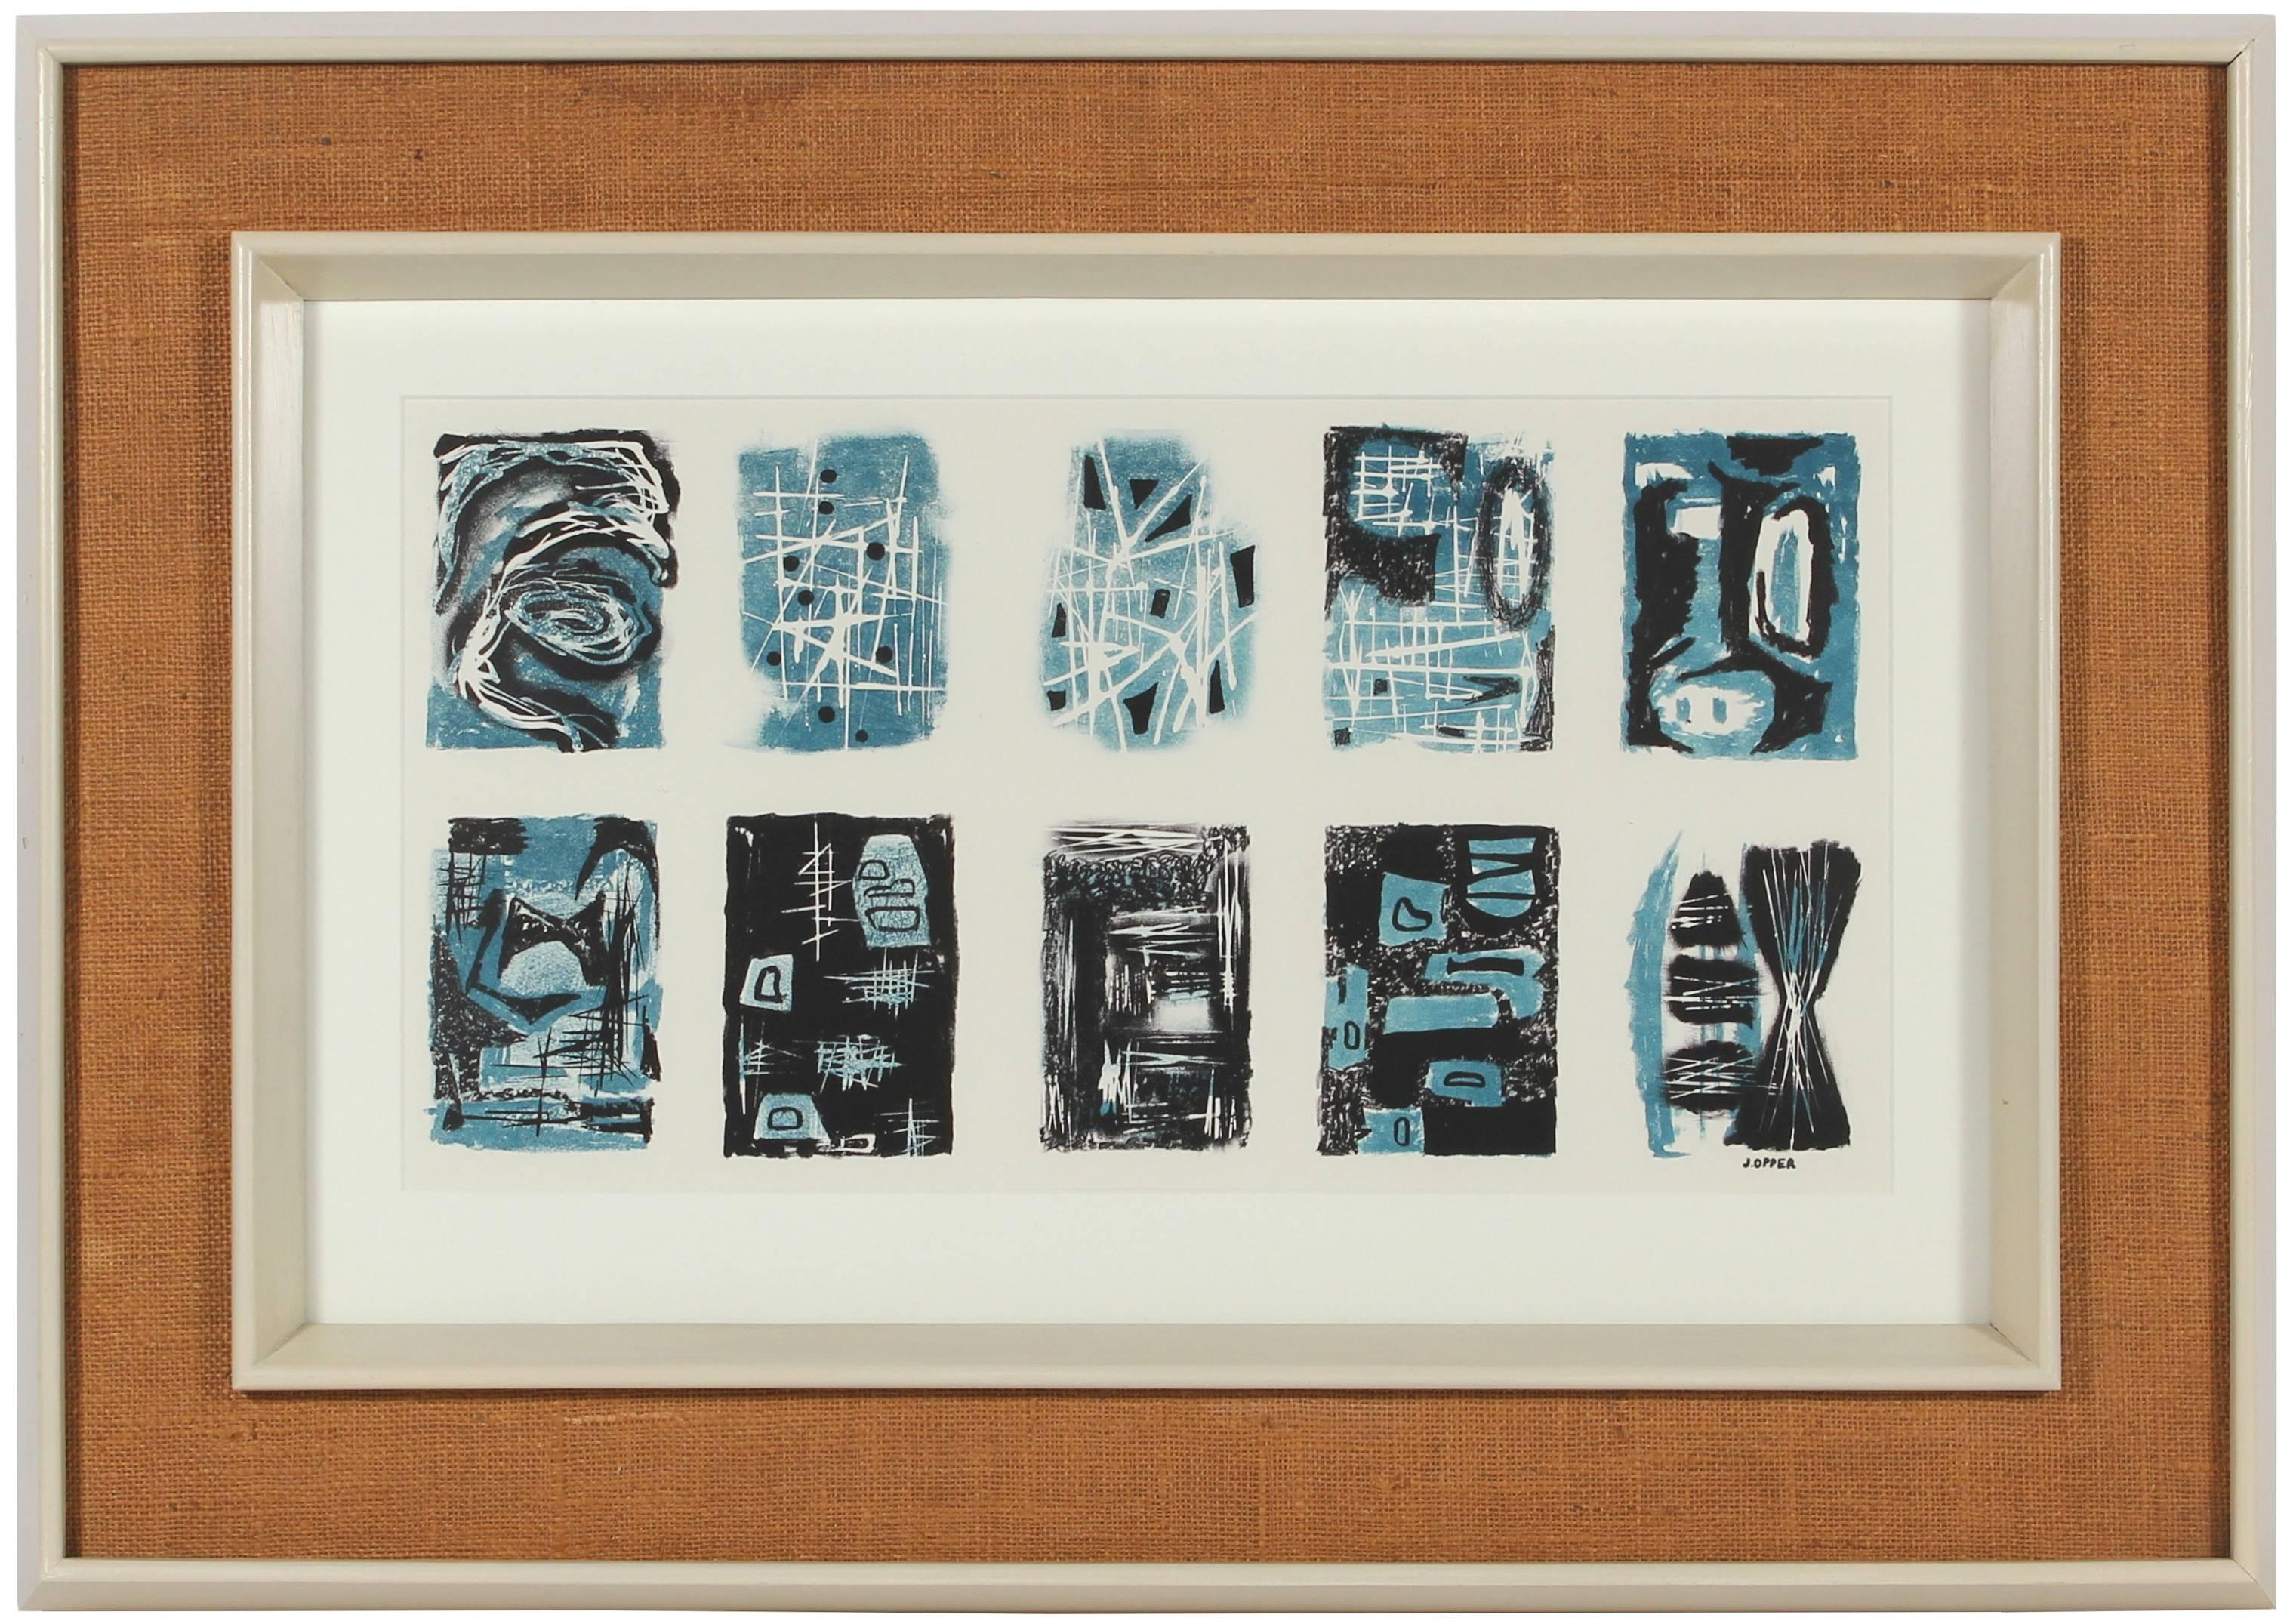 This late 1940s- early 1950s stone lithograph on paper with blue and black mid-century abstractions is by California artist Jerry Opper (1924-2014). Opper studied at Chouinard Art Institute, at the Colorado Springs Fine Arts Center and at the